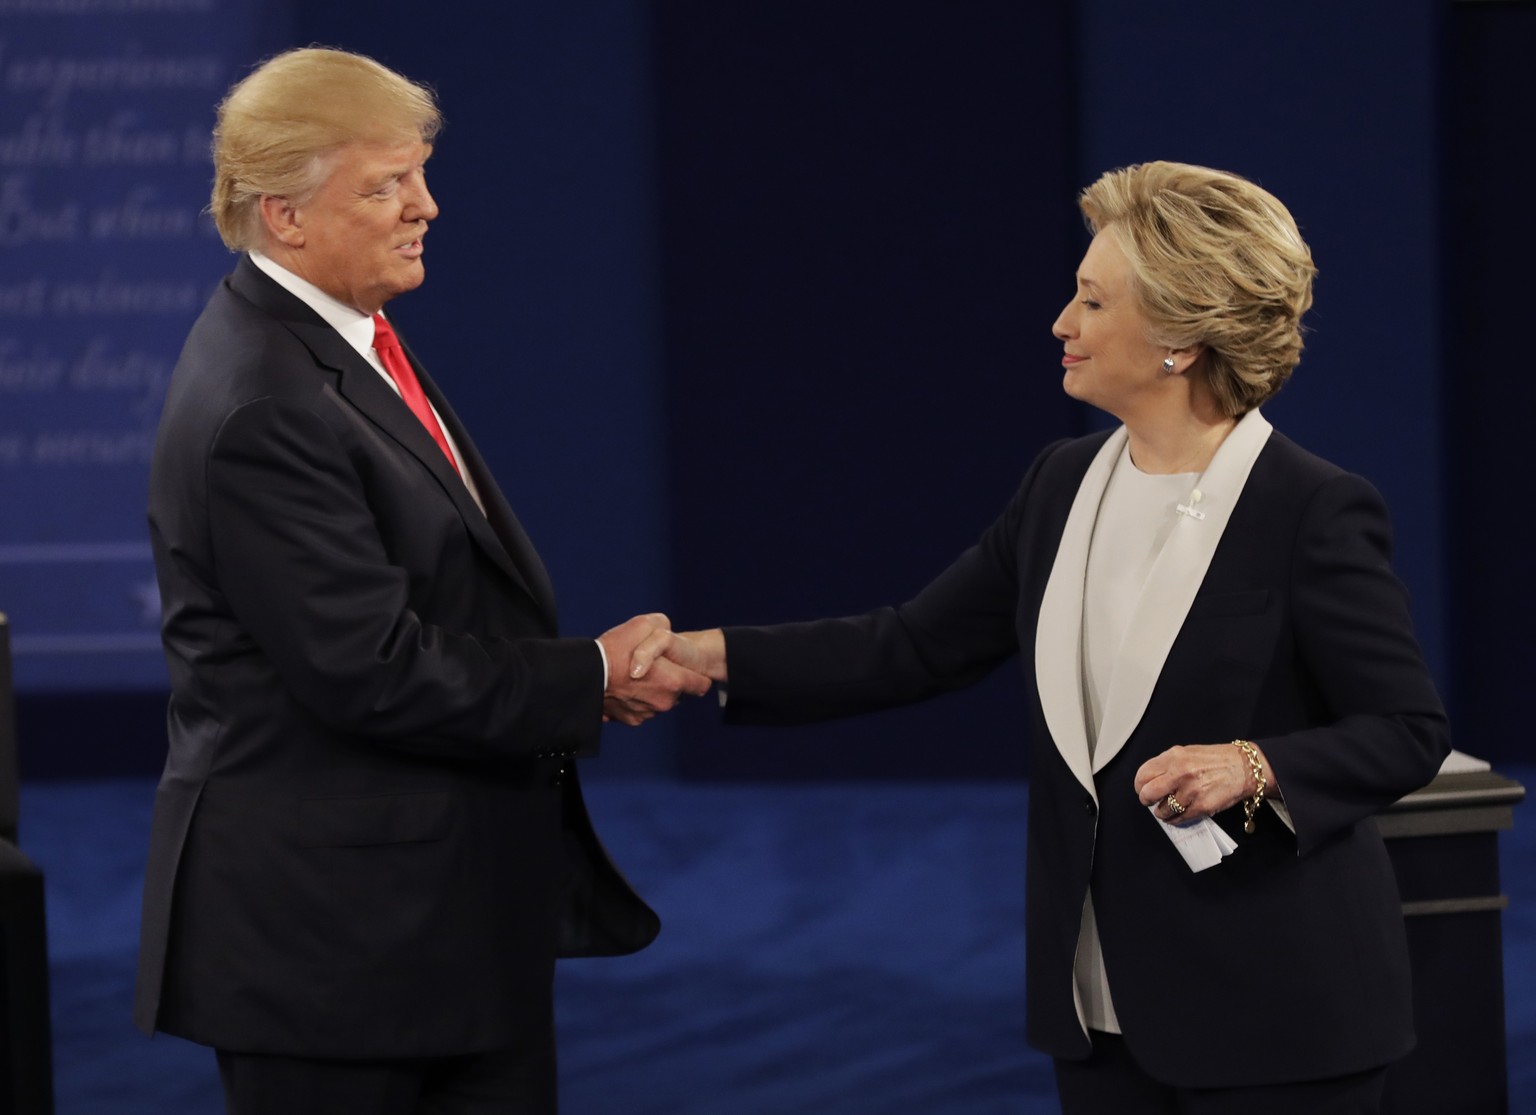 Republican presidential nominee Donald Trump shakes hands with Democratic presidential nominee Hillary Clinton following the second presidential debate at Washington University in St. Louis, Sunday, O ...